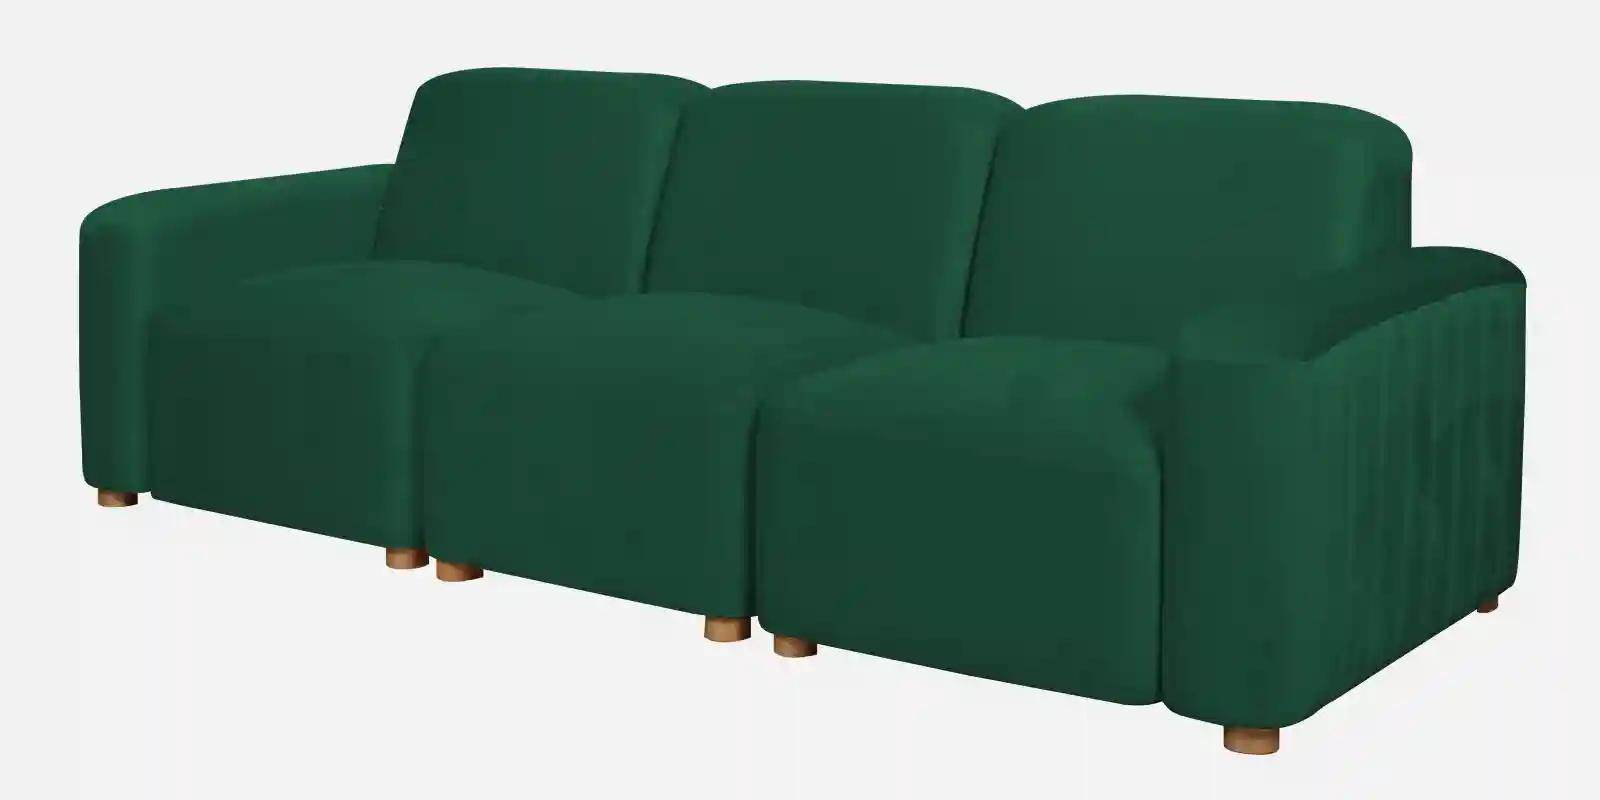 Pine Wood Polyester Fabric Teal Green 3-Seater Sofa